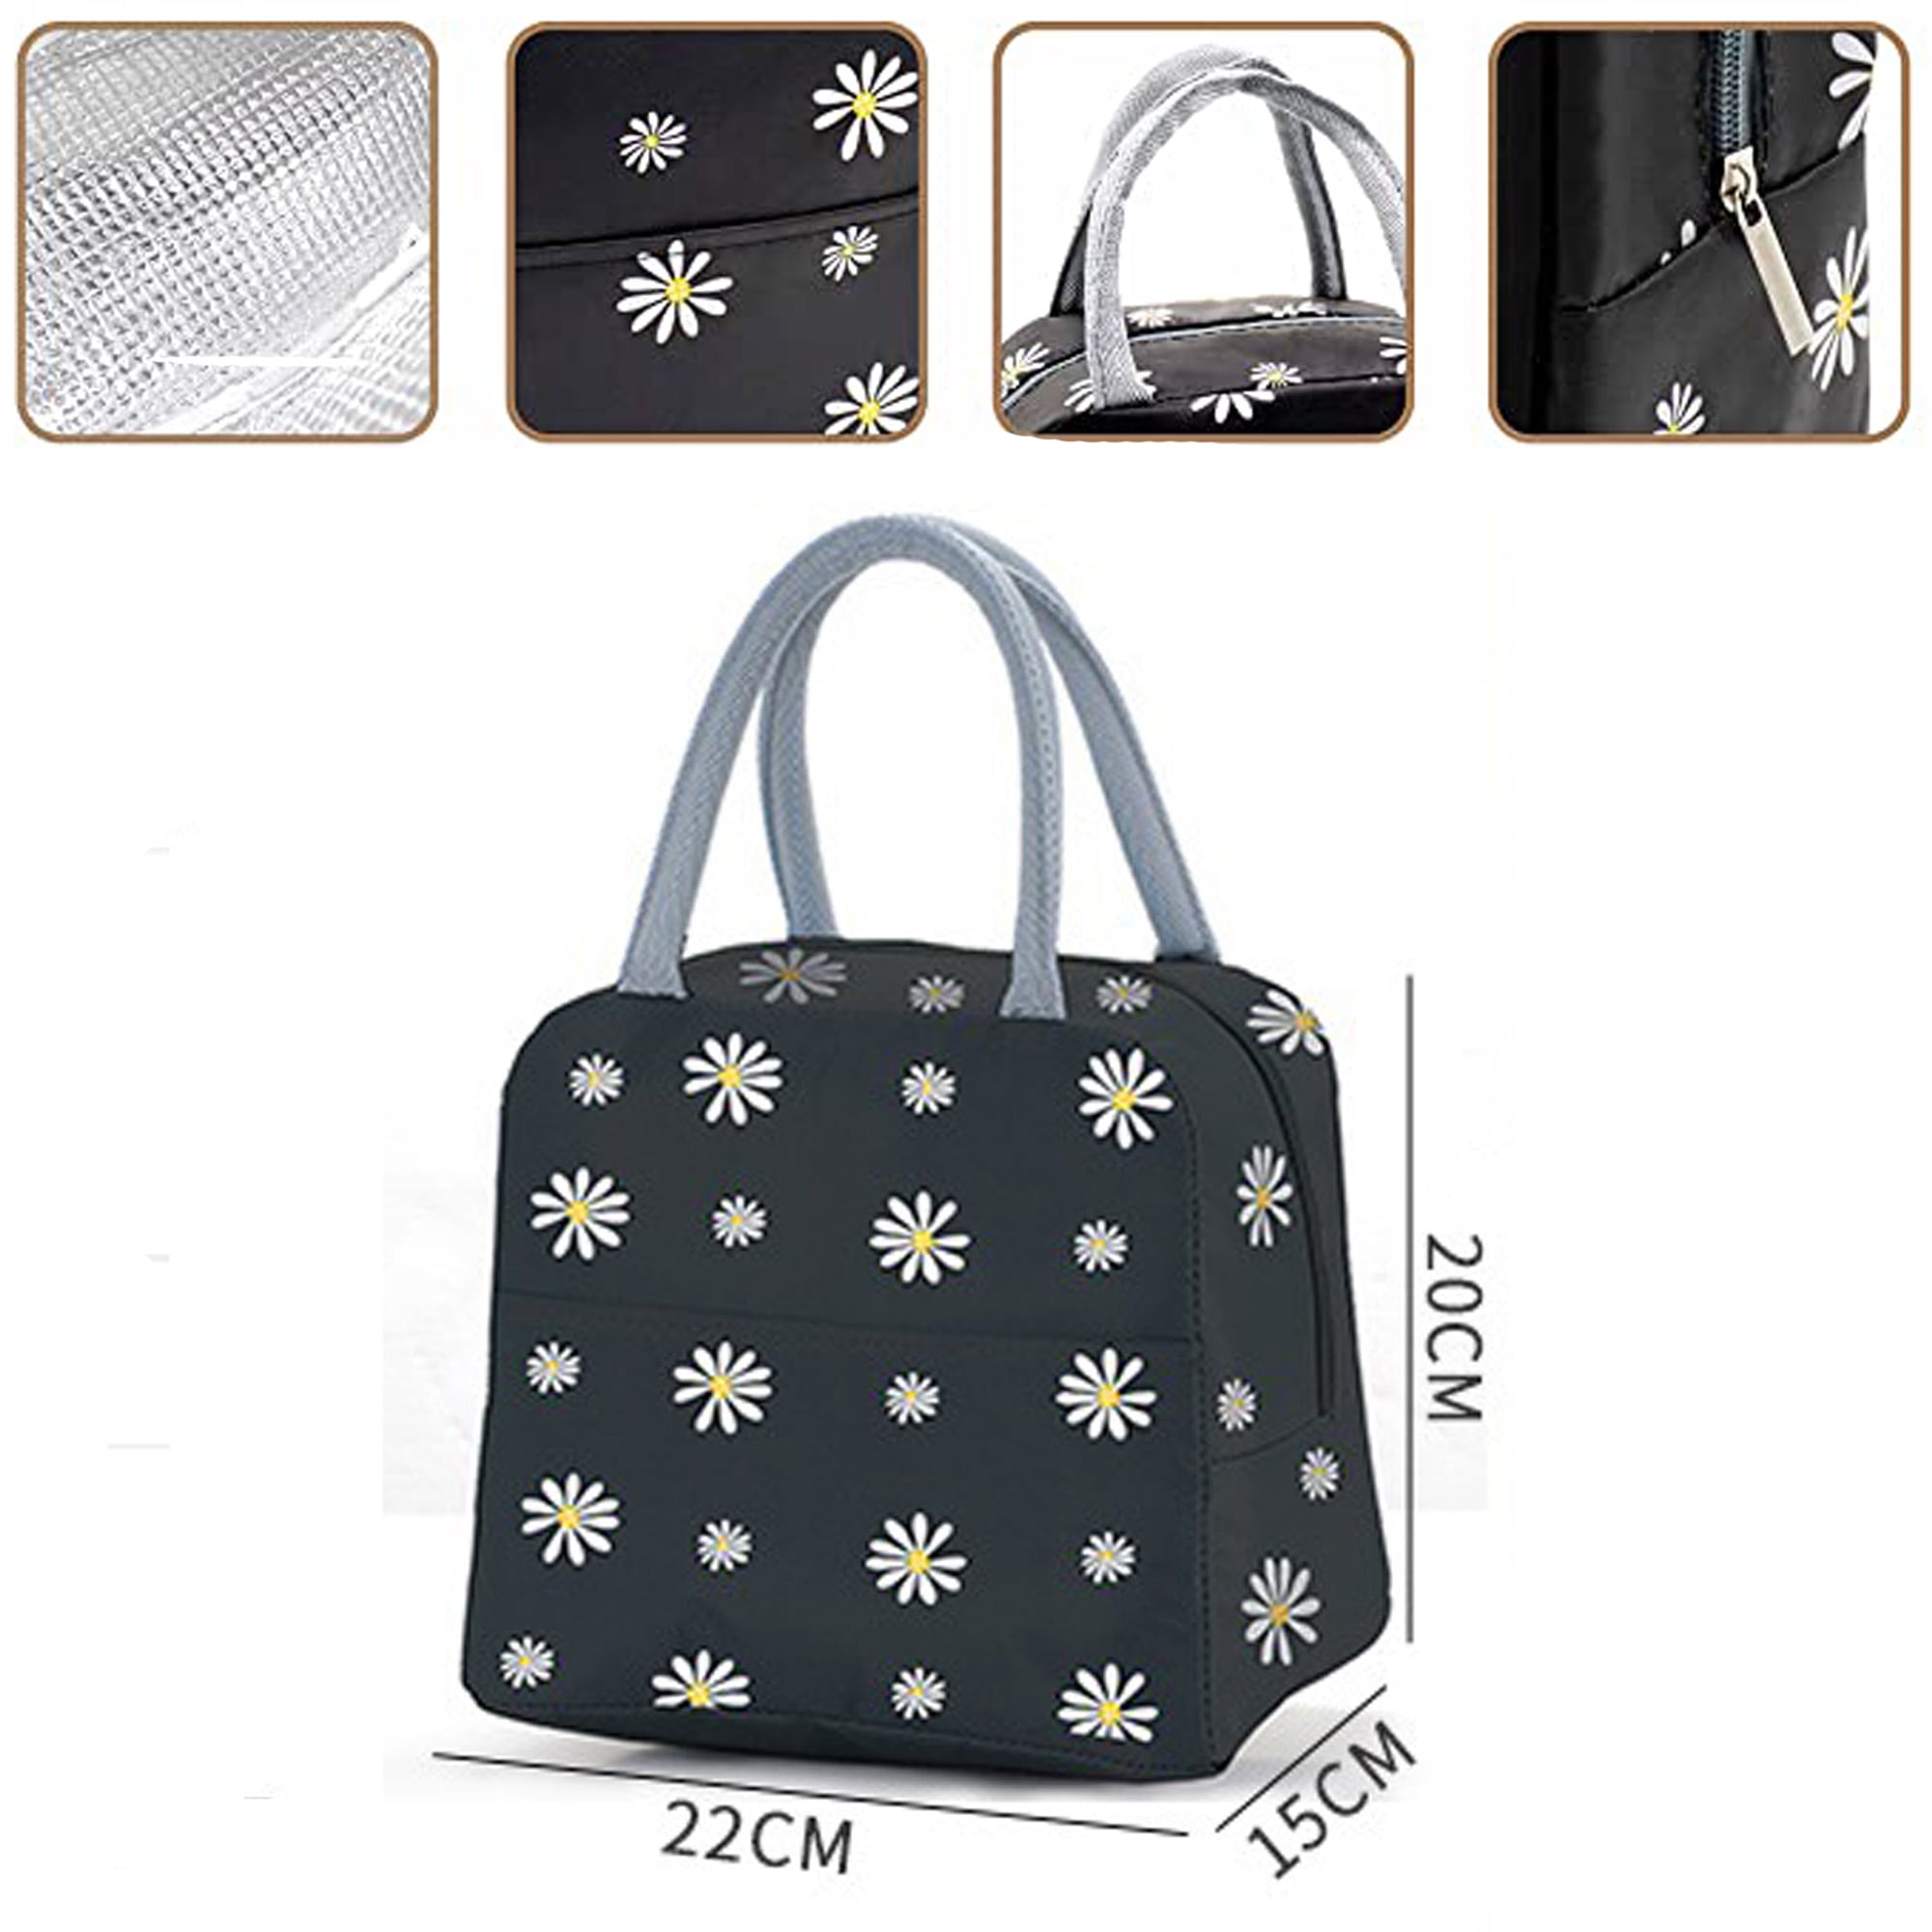 Daisy Print Lunch Bag, Portable Insulated Lunch Box Storage Bag